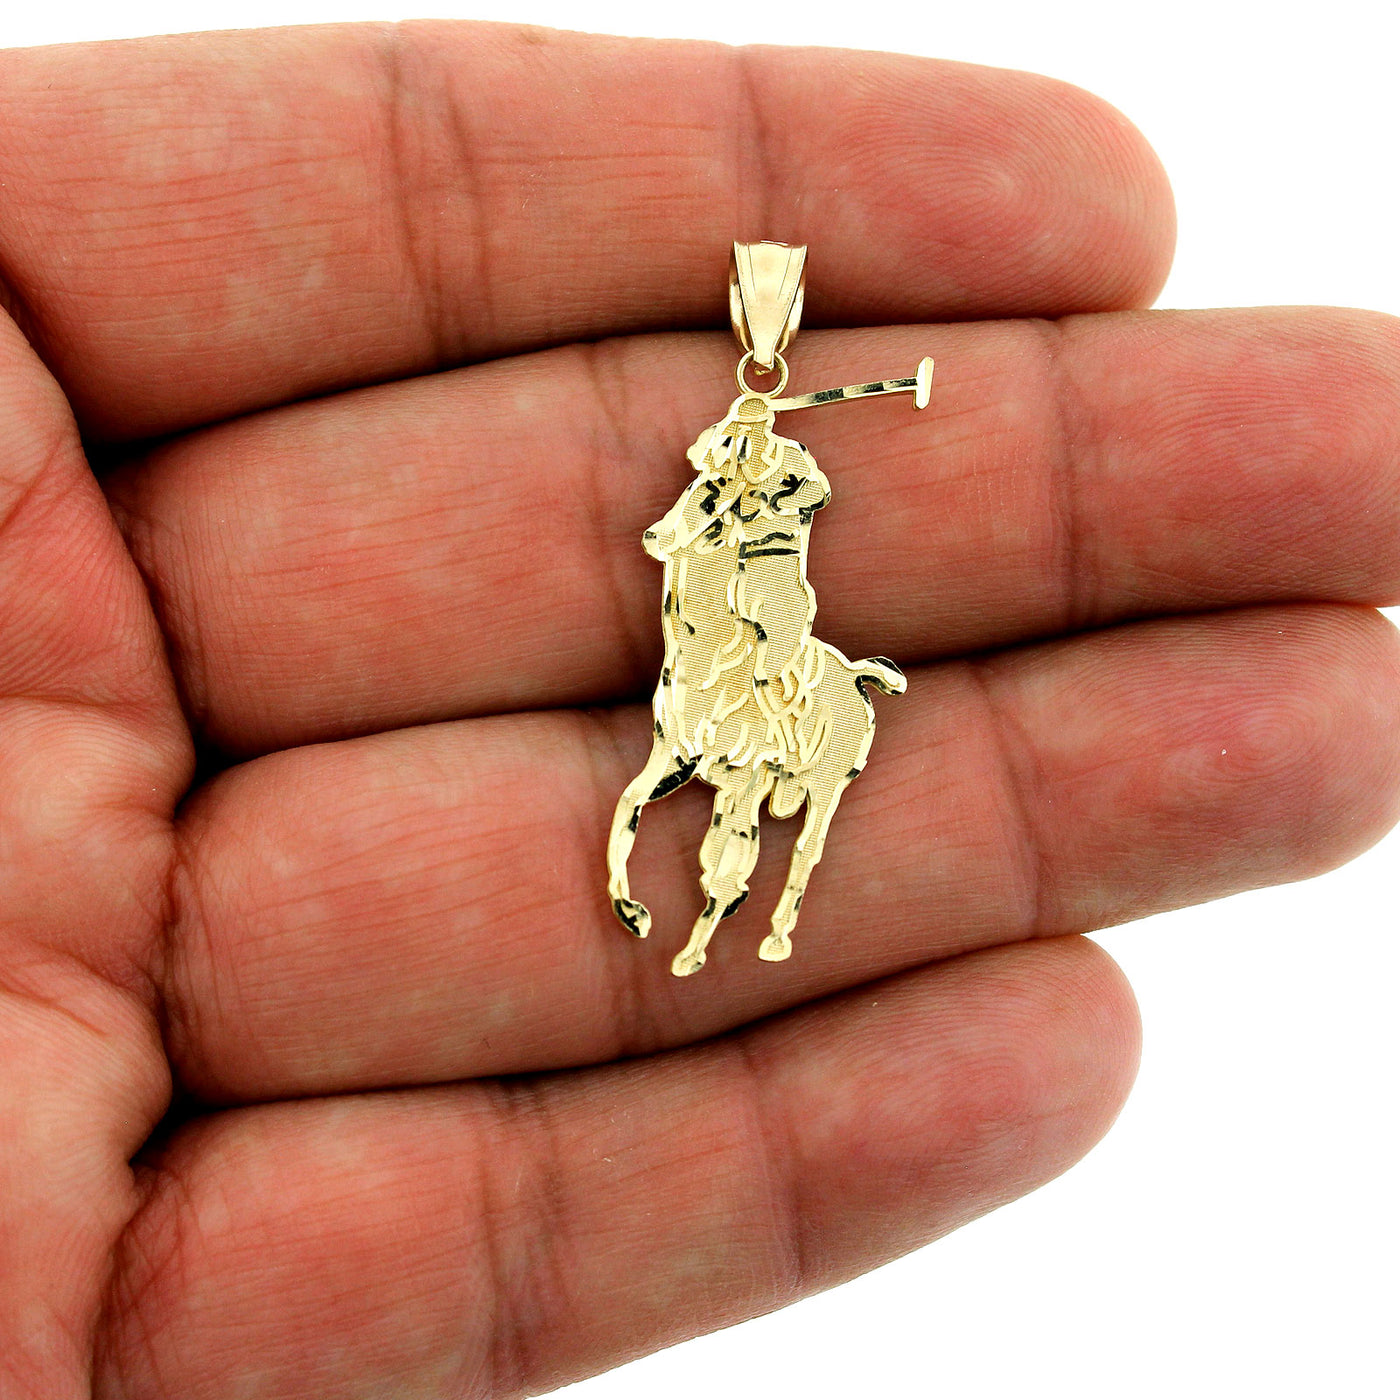 Mens 10K Solid Yellow Gold Polo Horse Rider Charm Pendant With 2.5mm Rope Chain Necklace Set